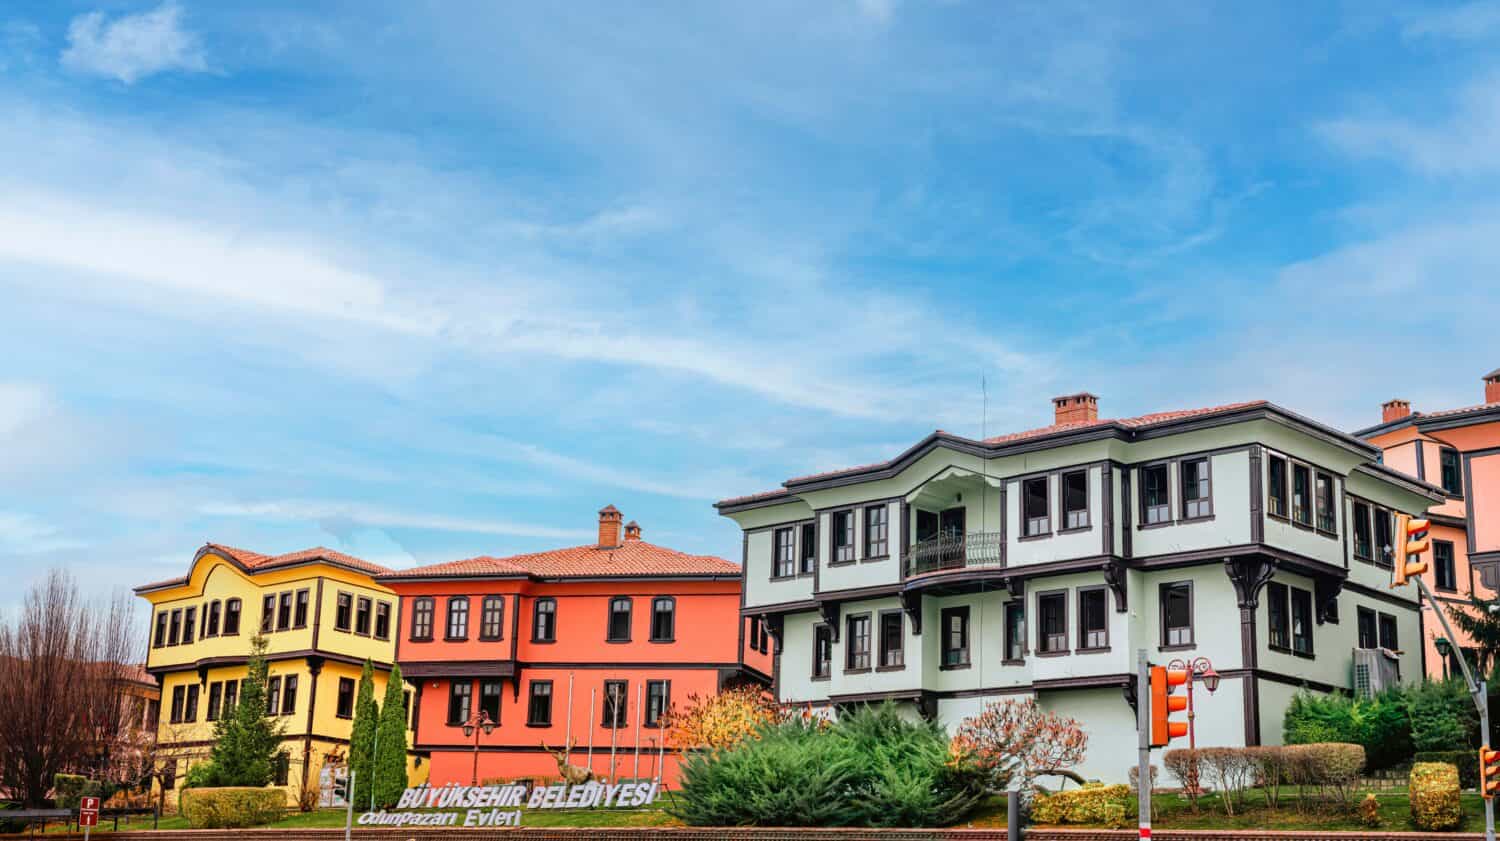 Colorful district houses view in city Eskisehir, Turkiye.The text in the image is: Metropolitan Municipality, Odunpazari Houses